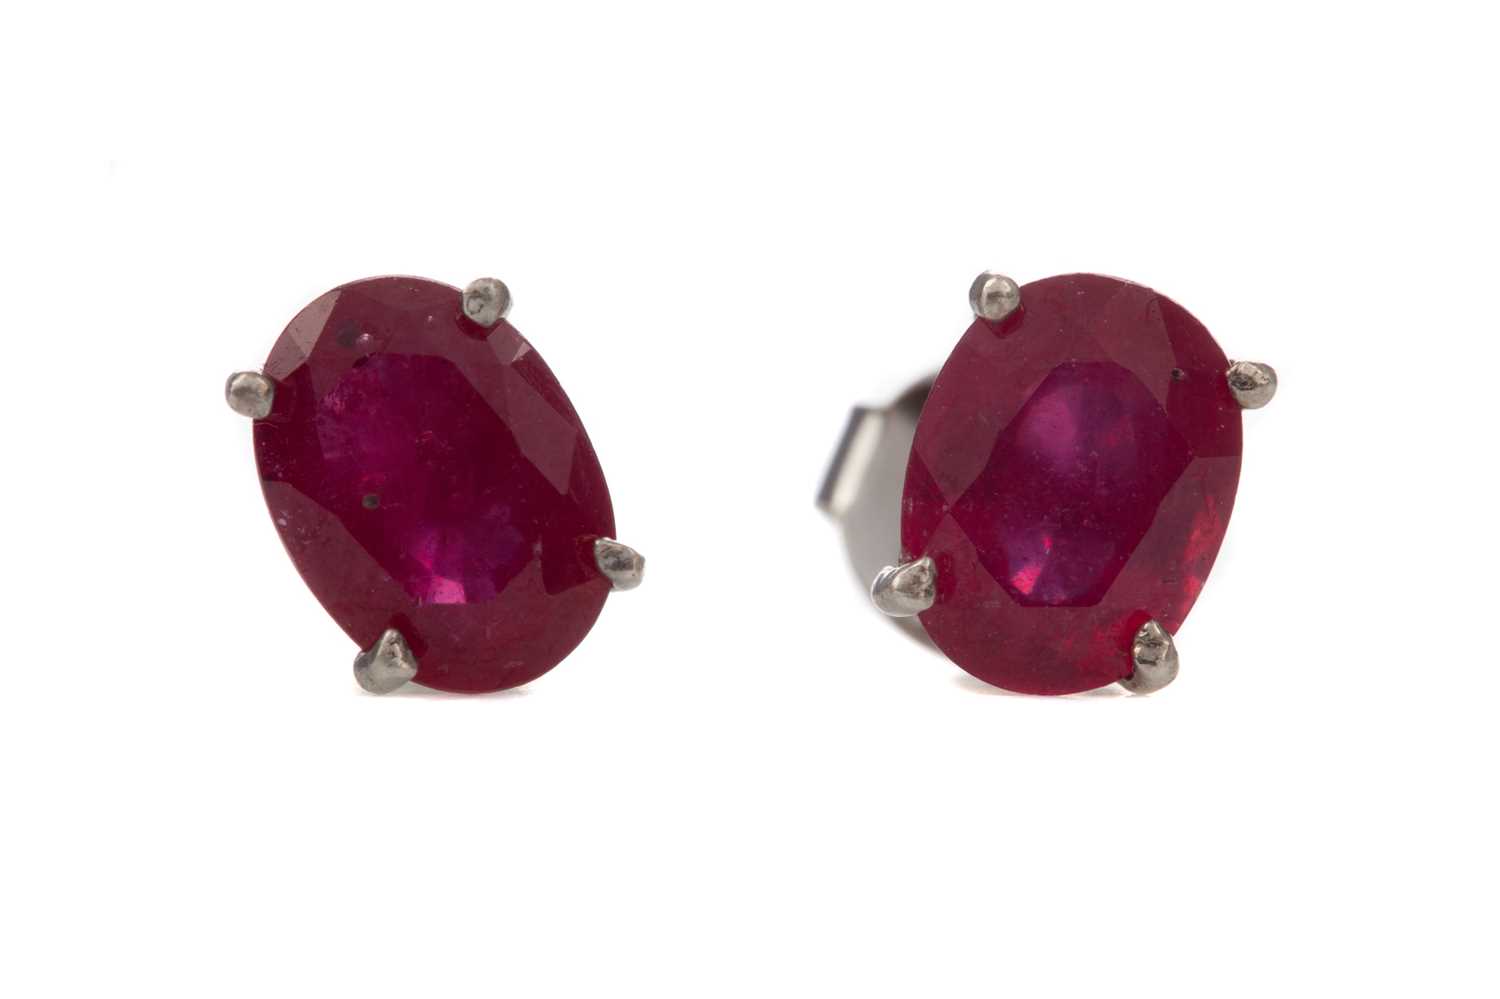 Lot 1415 - A PAIR OF TREATED RUBY STUD EARRINGS